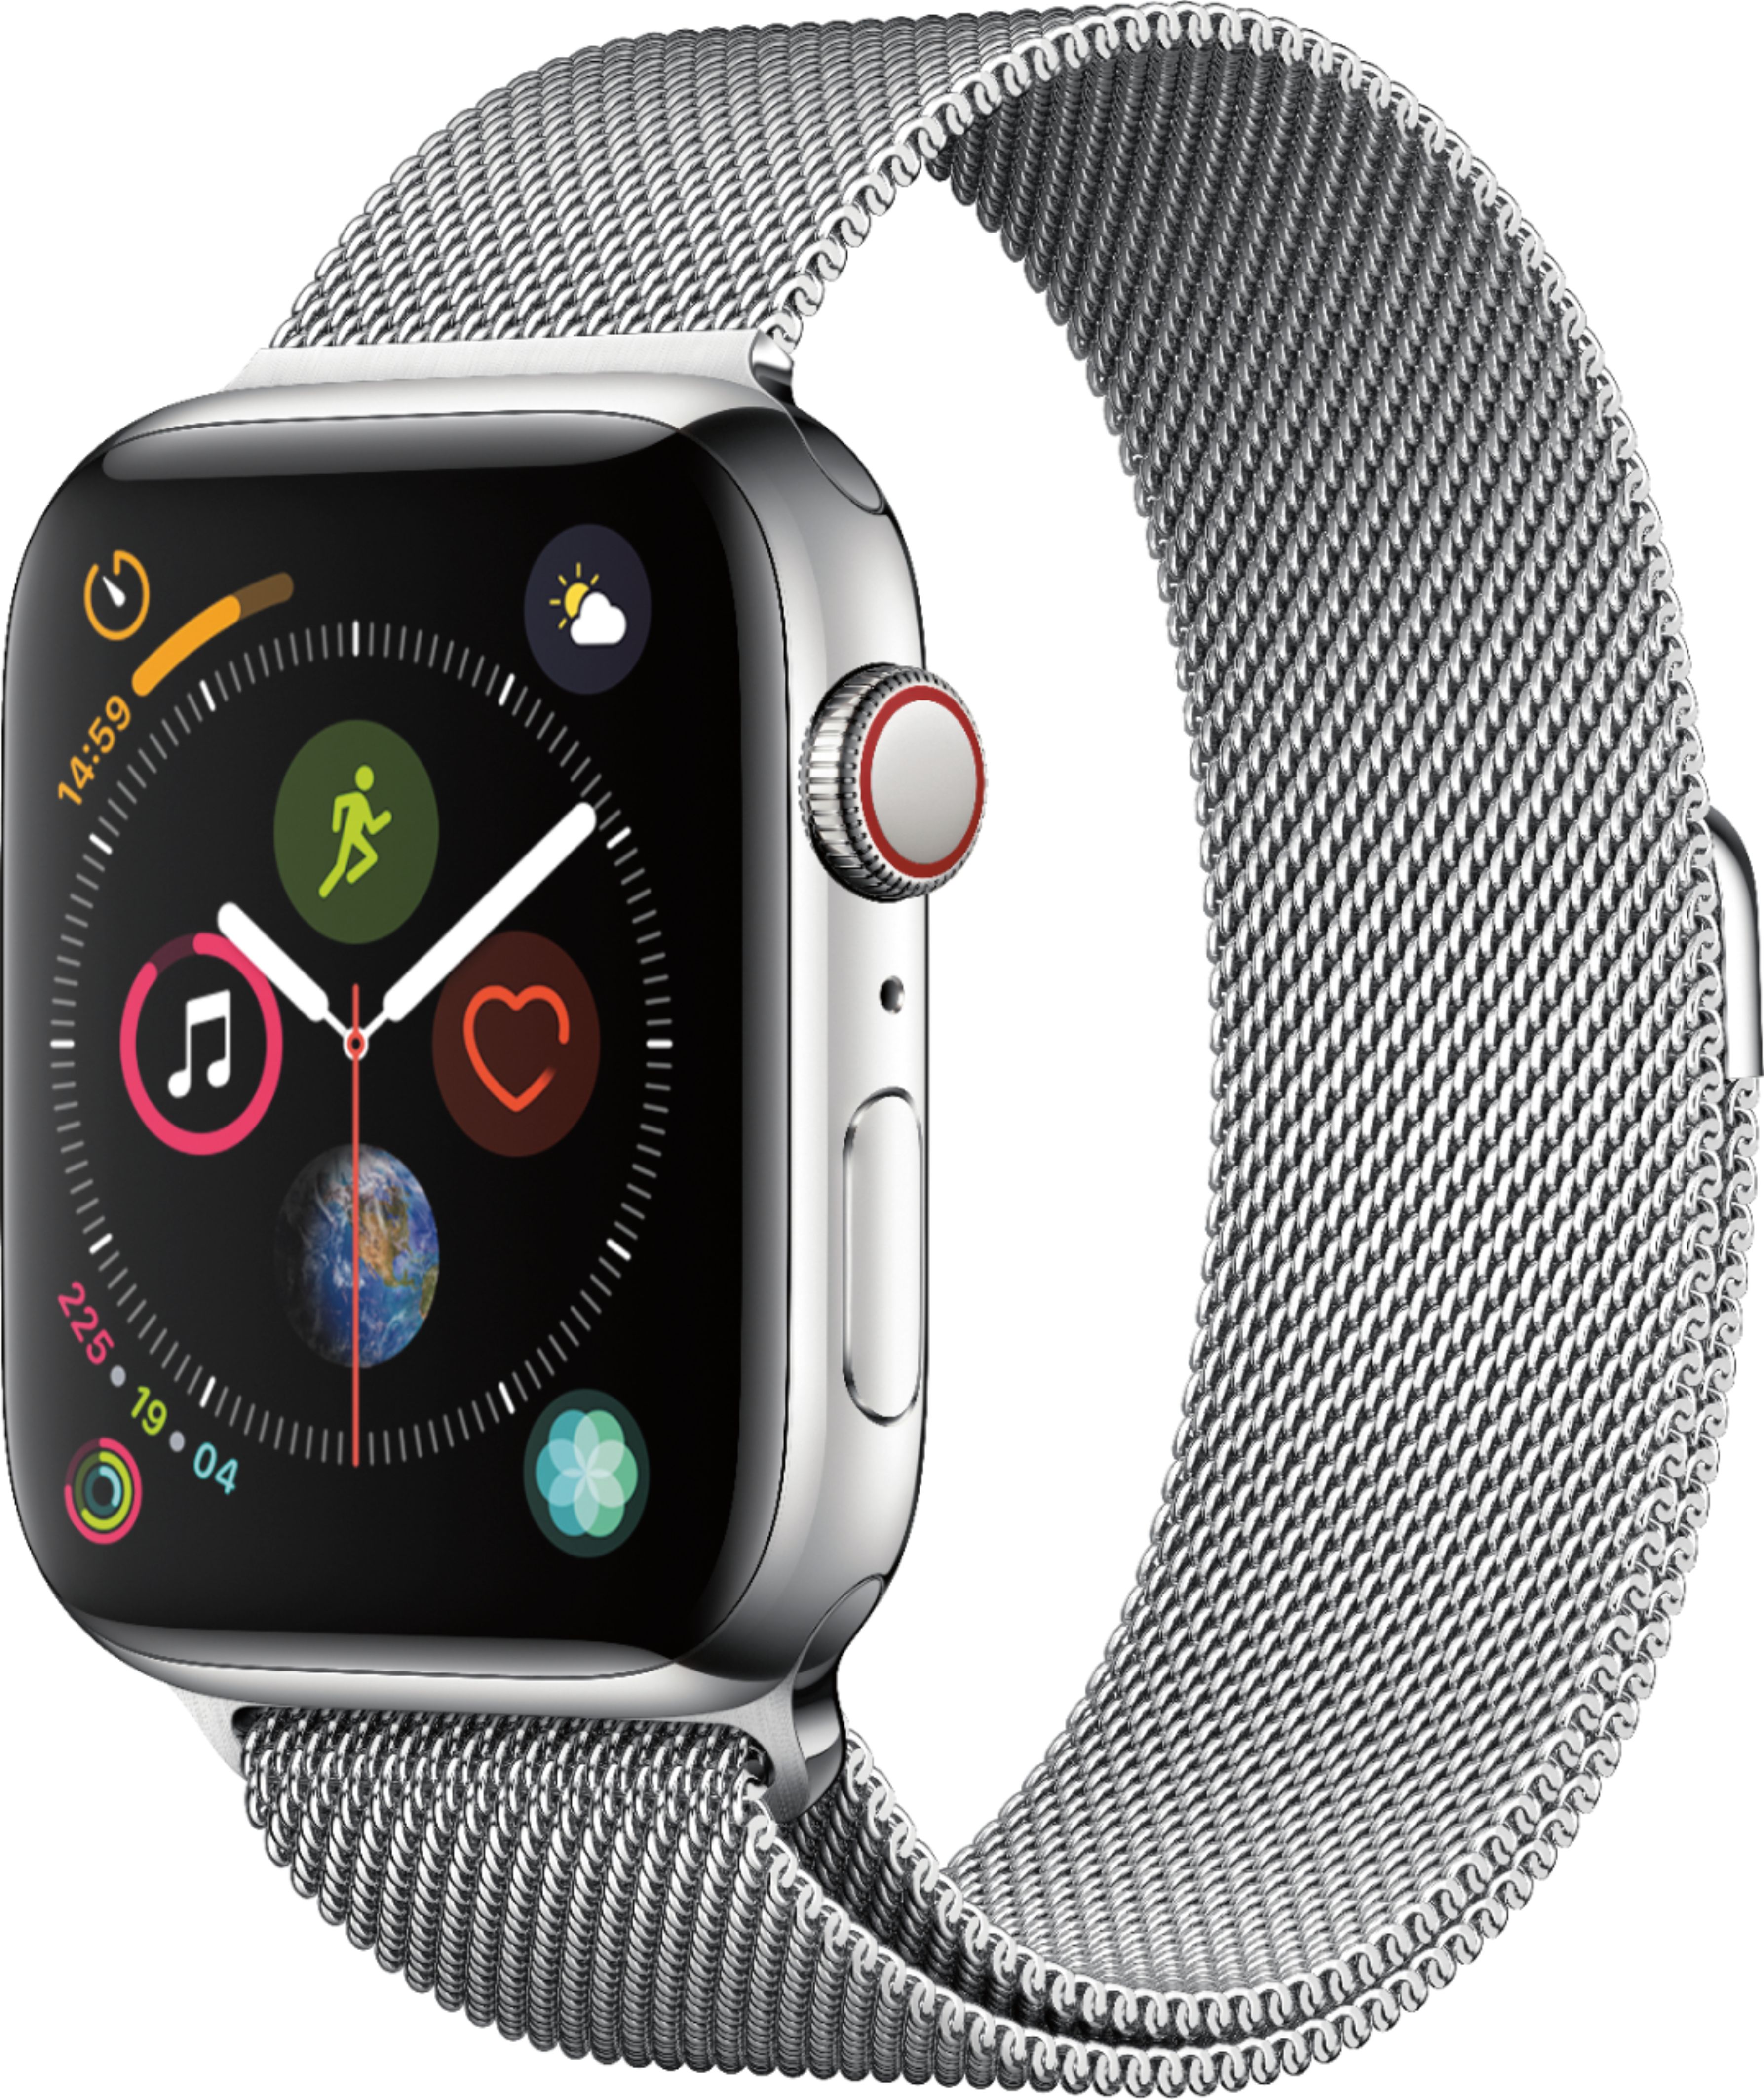 Apple Watch Series 4 (GPS + Cellular) 44mm Stainless Steel Case with  Milanese Loop Stainless steel MTV42LL/A - Best Buy